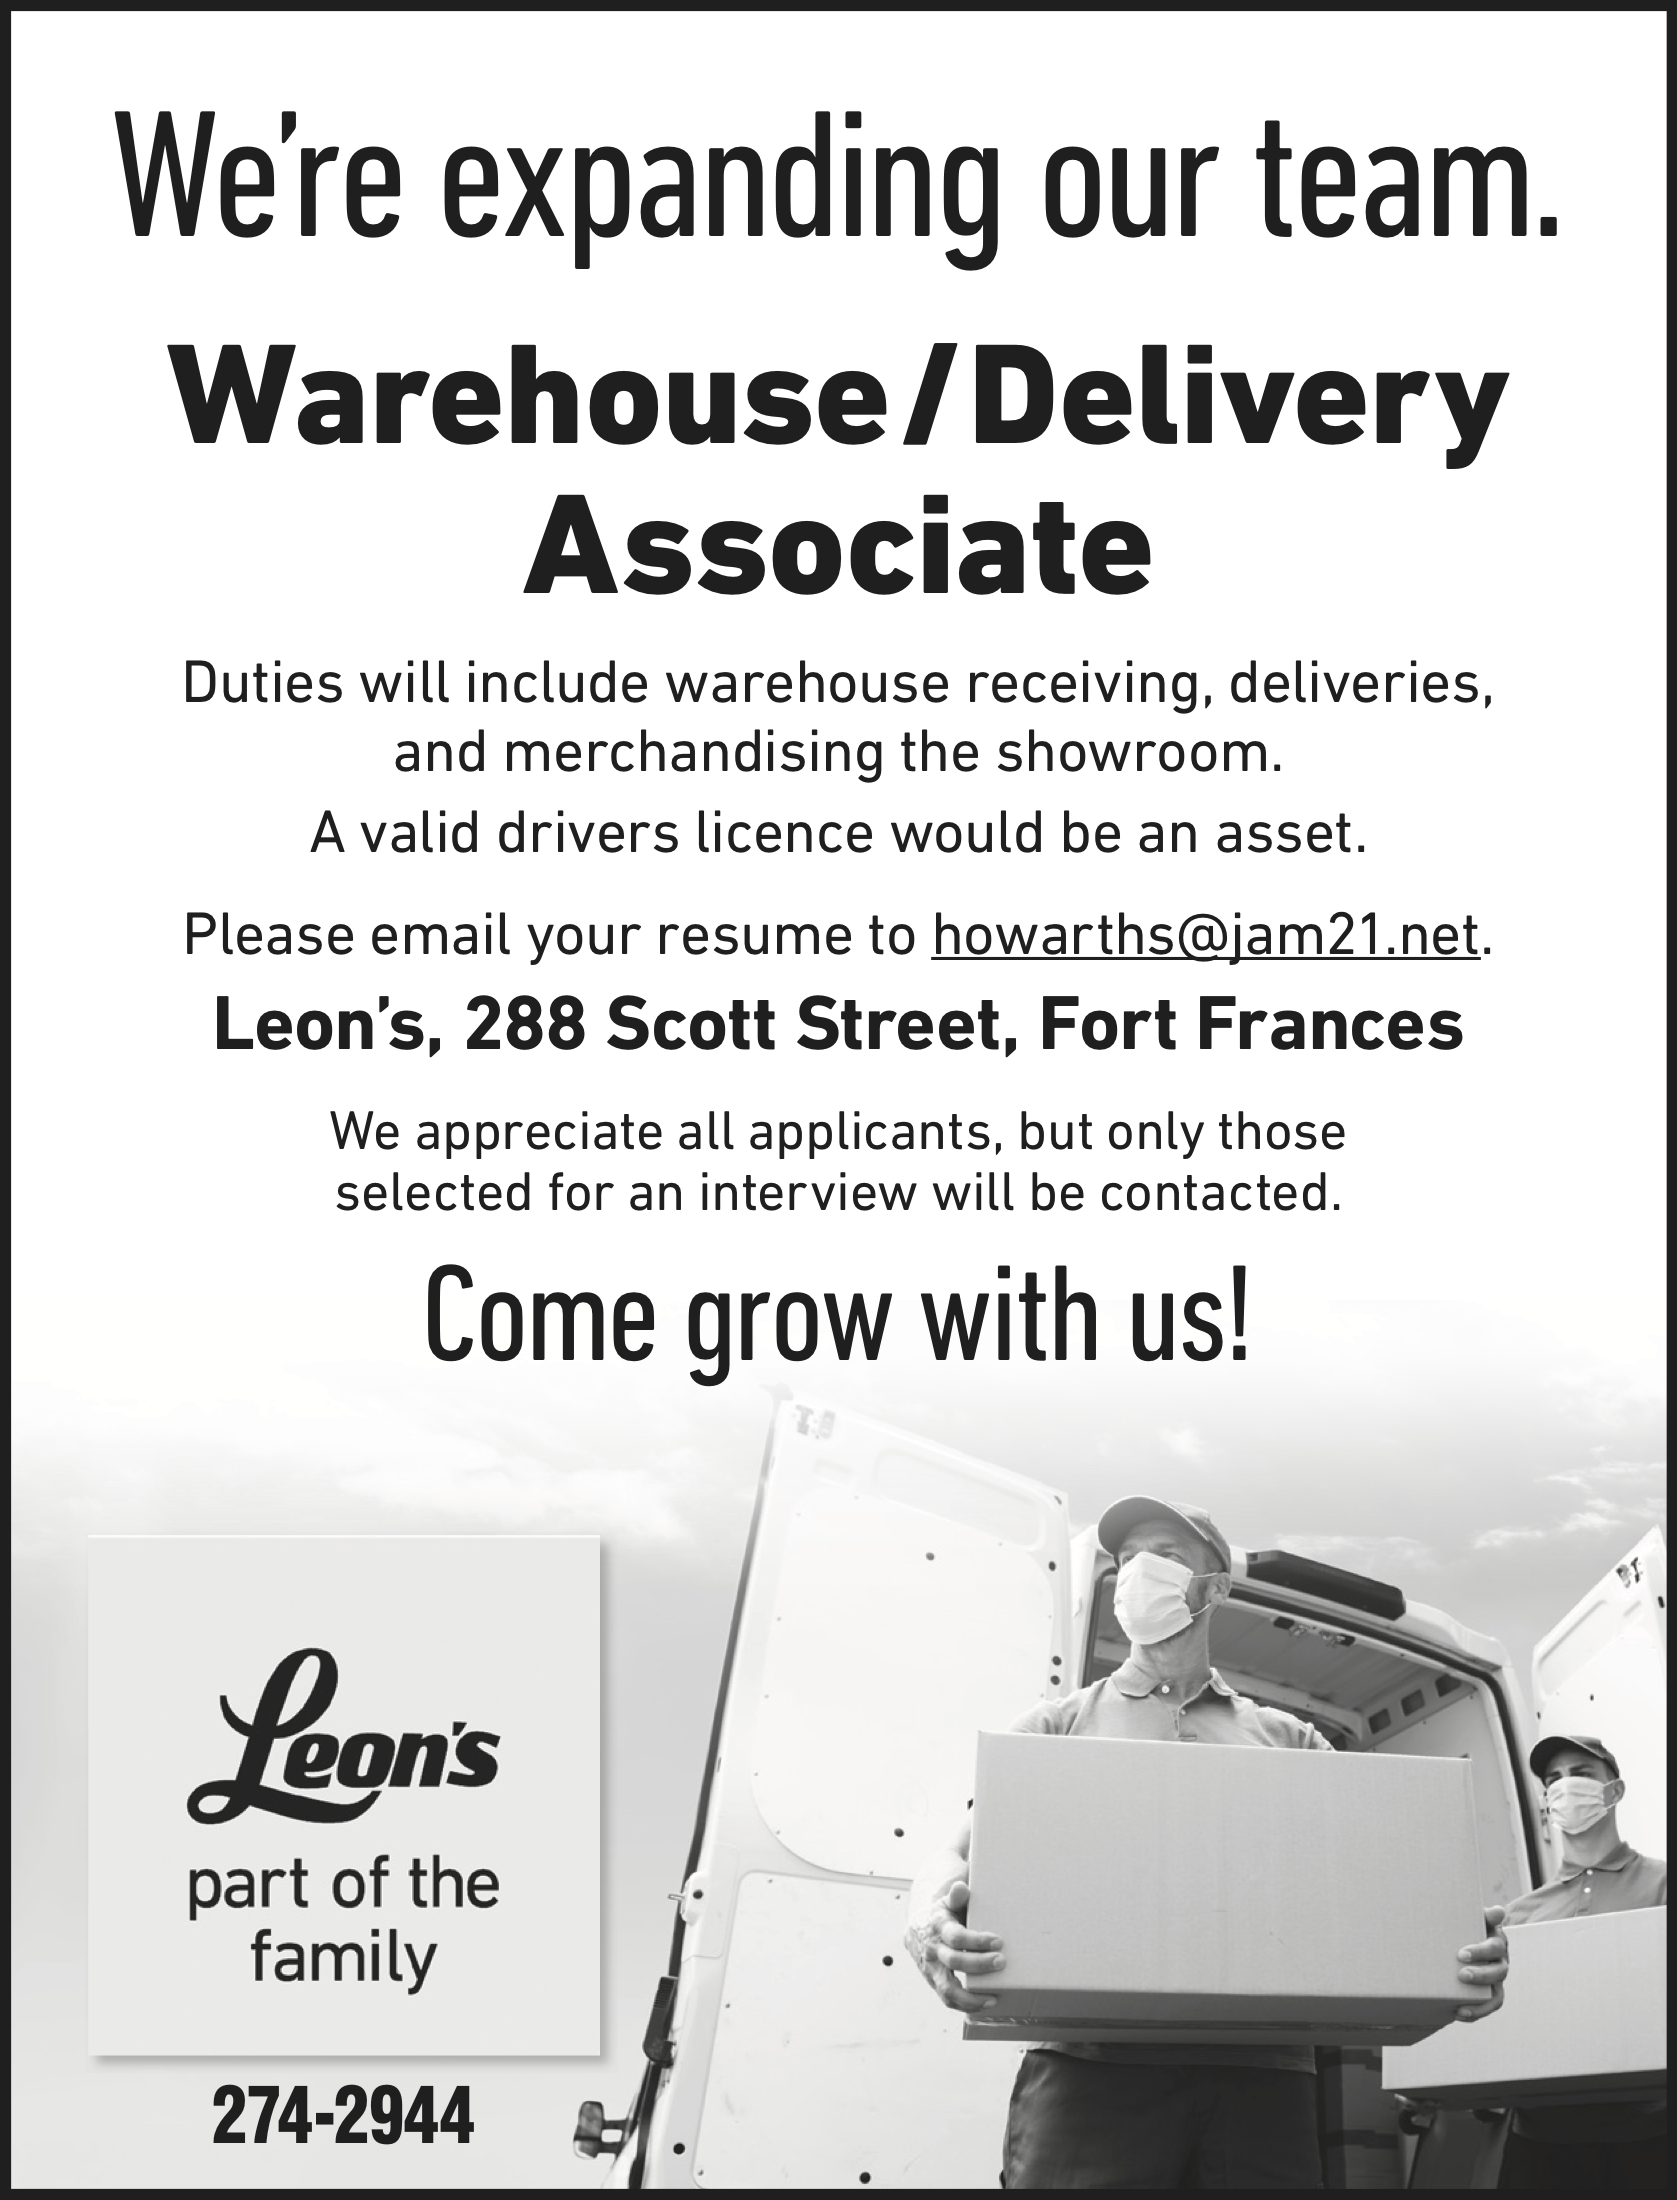 Warehouse/Delivery Associate